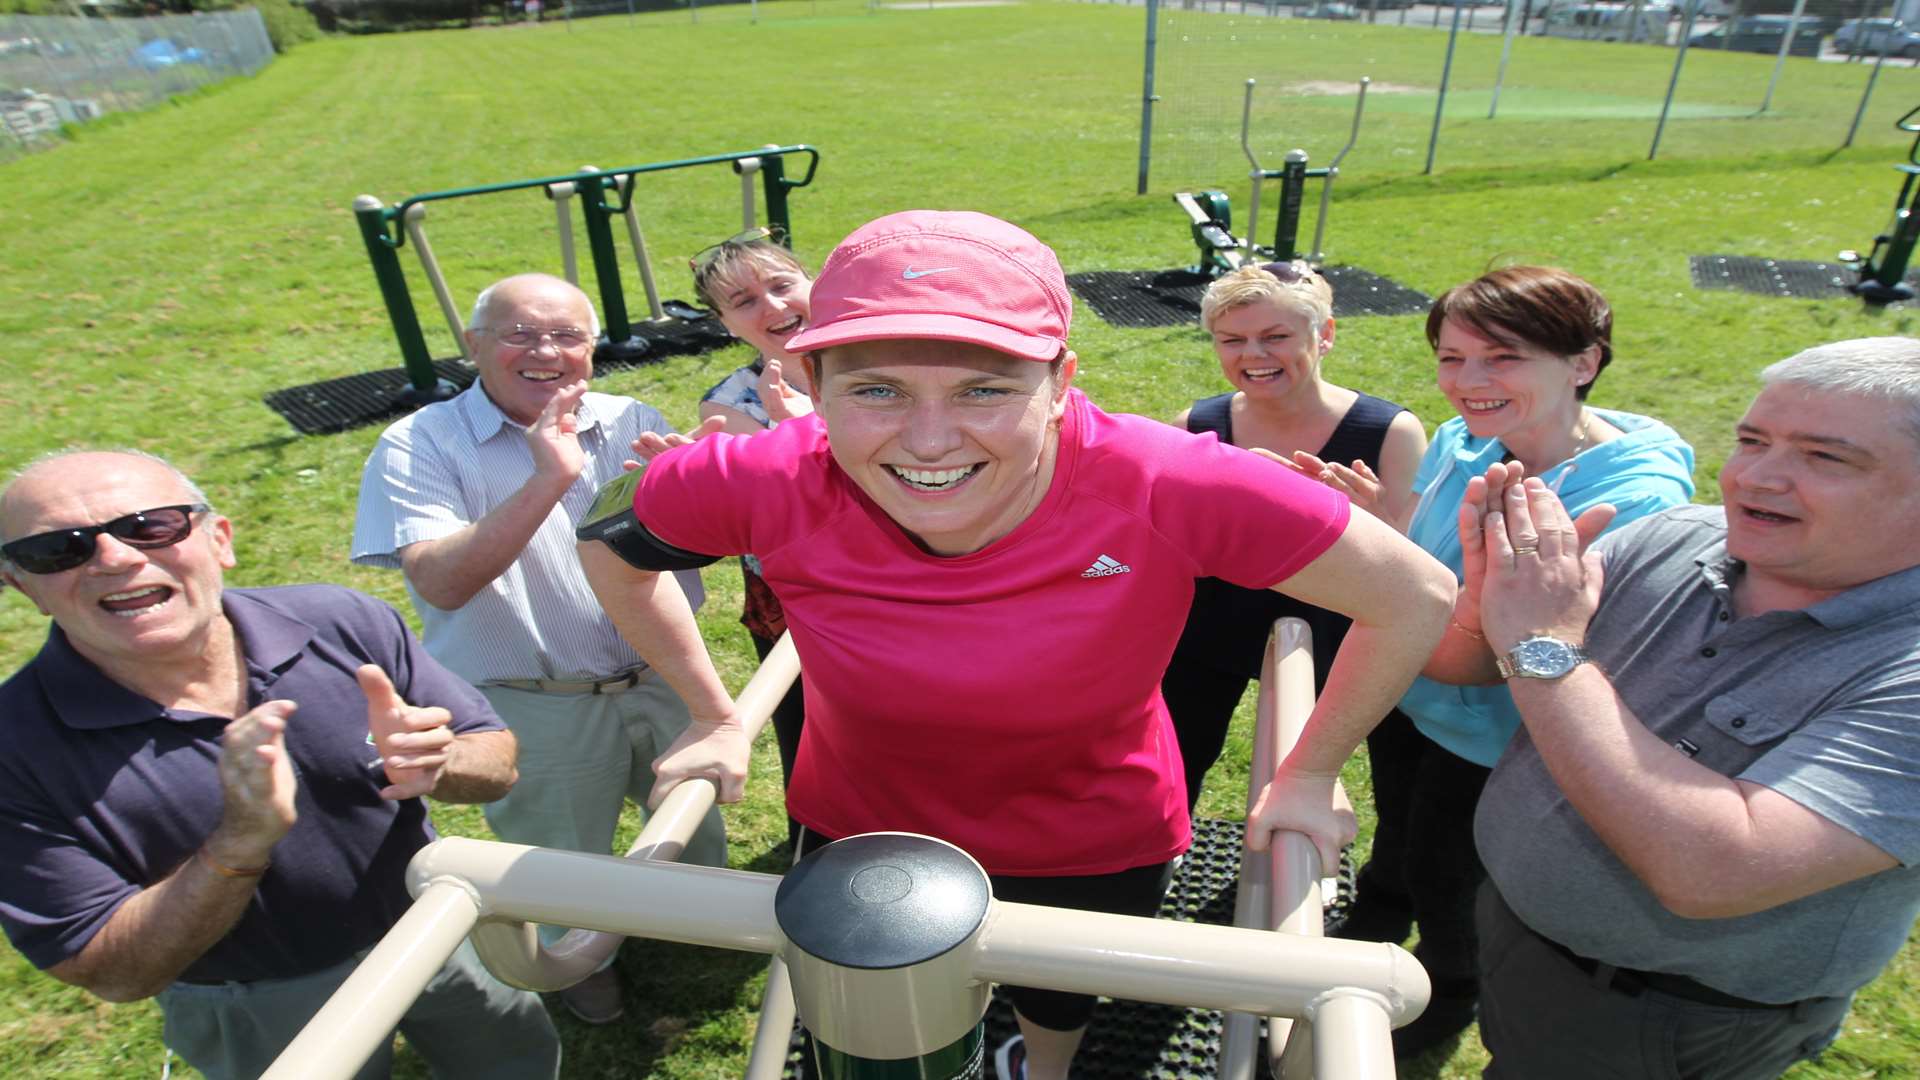 Evie Ashley, resident in pink, doing exercise on new park equipment with from left, Keith Impiazzi, parish councillor, Dave Hammock, Borough Councillor, Tracey Williams, resident, Carolyn Drayson, resident, Anna Munday, parish councillor and Keith Burgin, parish councillor, giving her encouragement in Bean Park.